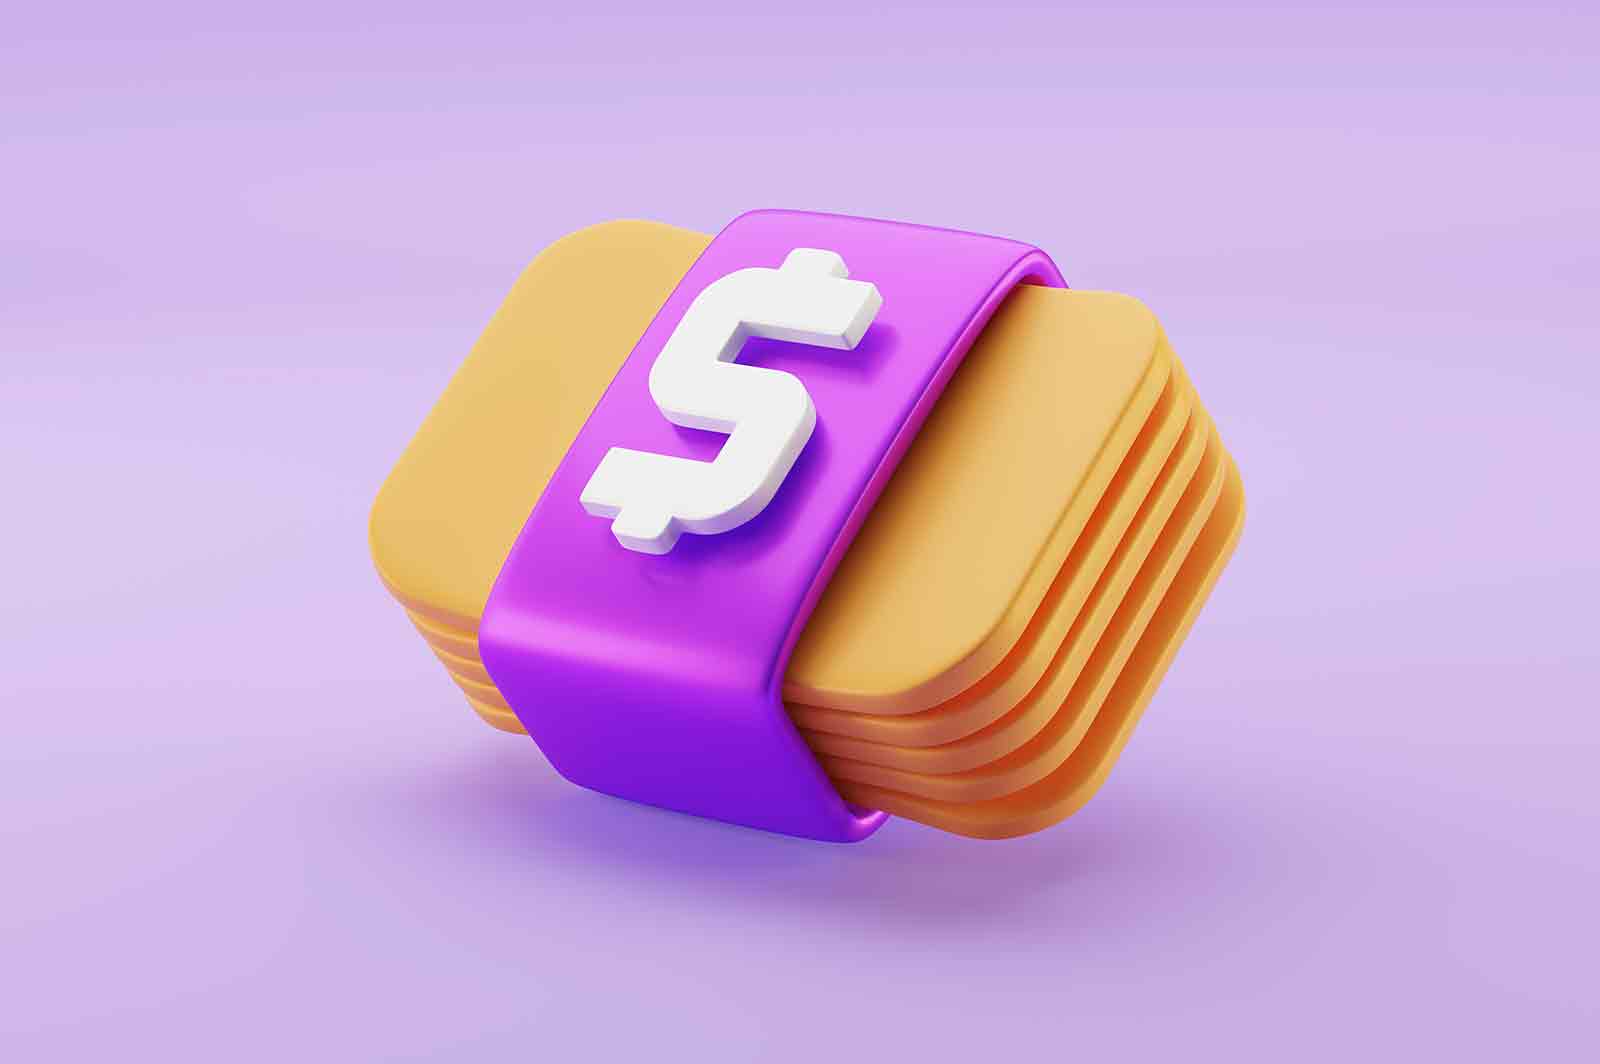 Money pack, cash 3d rendered icon illustration. Stack of banknotes. Earning or making cash, finance income or shopping concept